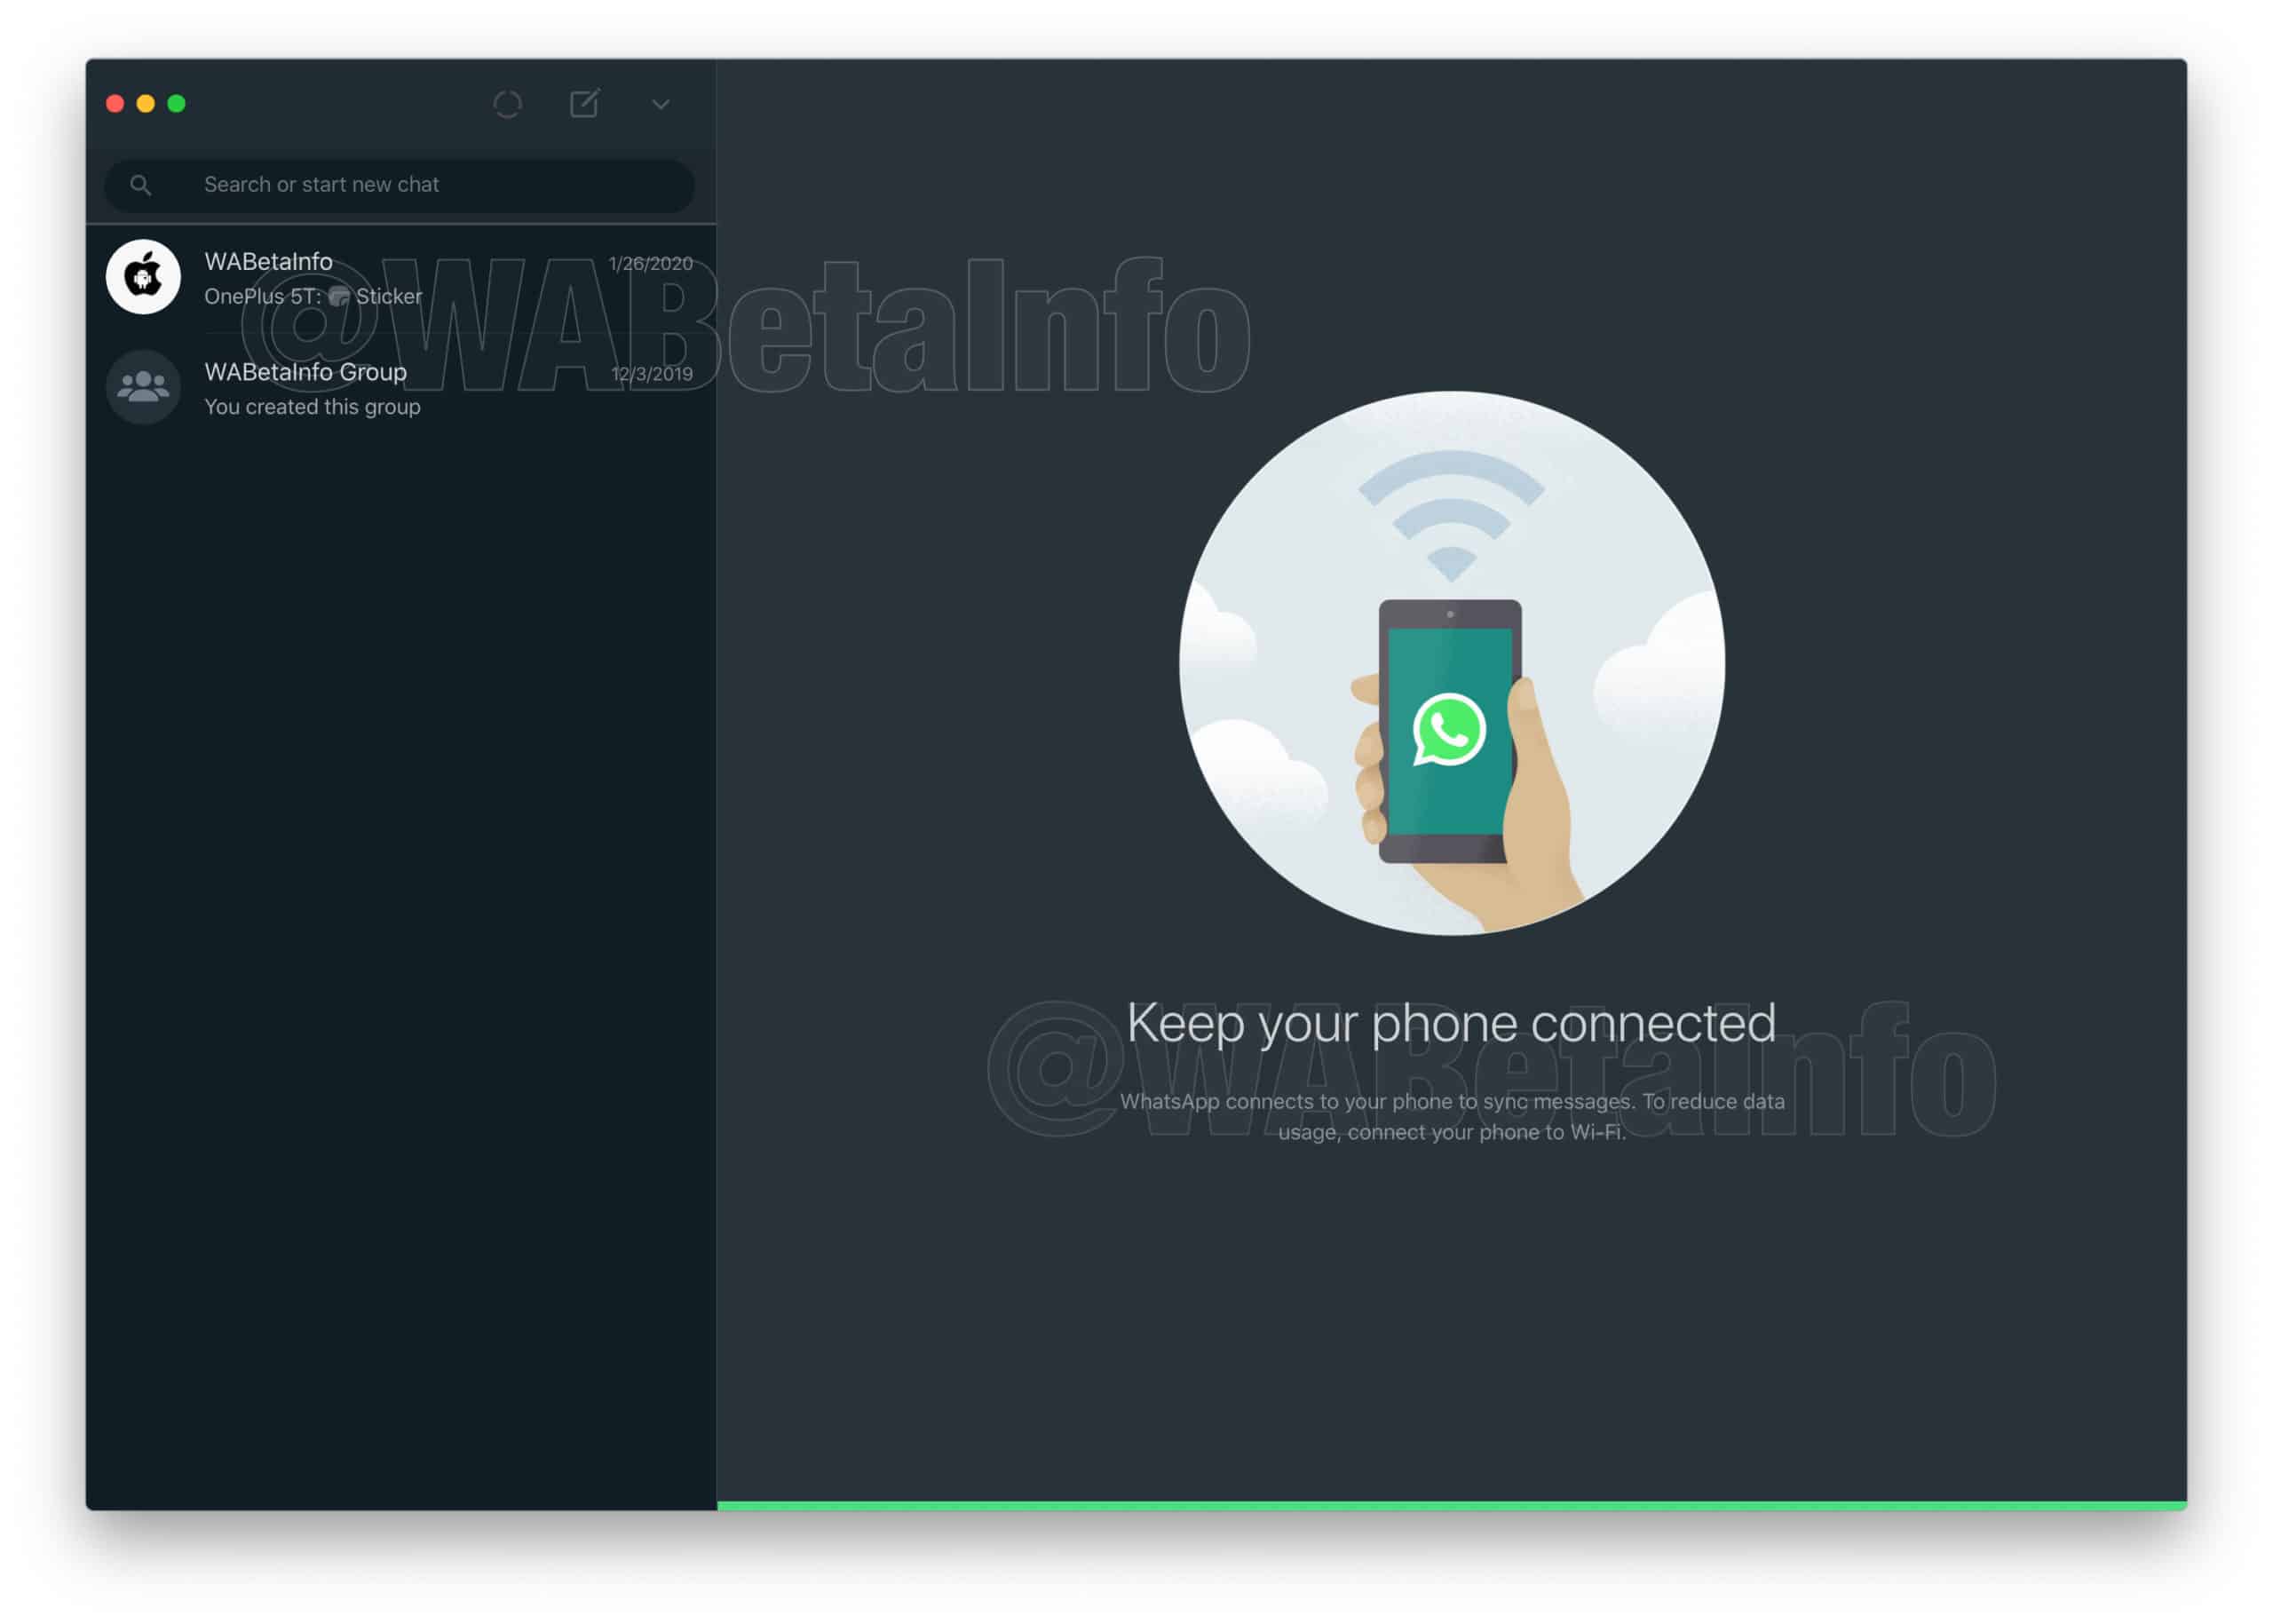 Whatsapp Dark Mode Is Coming For The Web And Desktop Versions